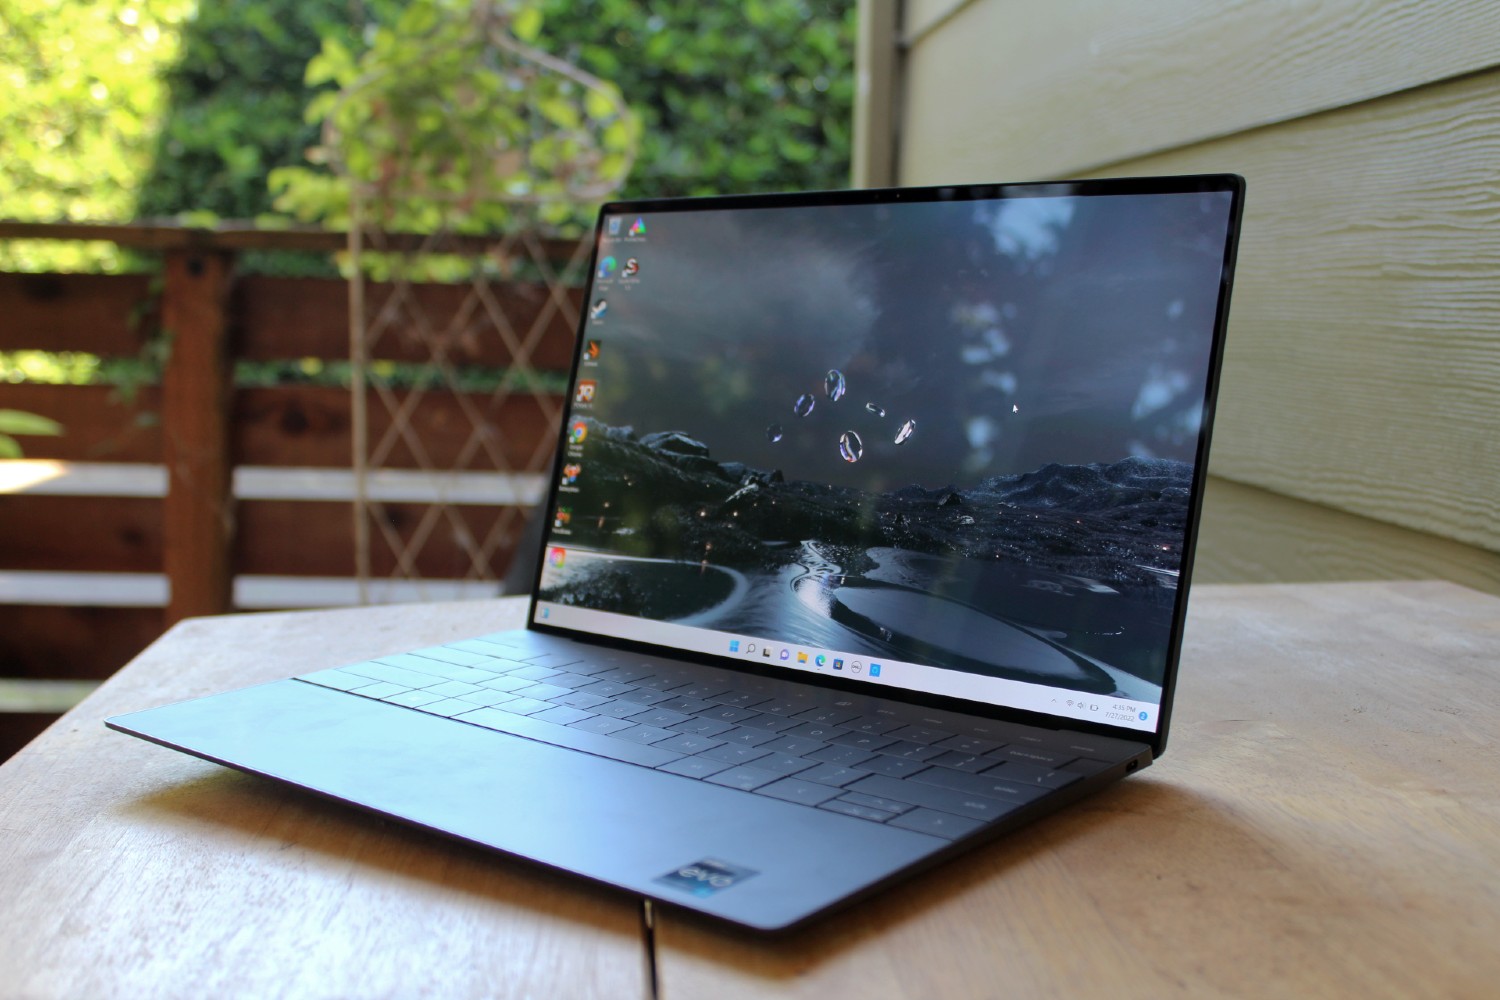 The Dell XPS 13 Plus on a table outside.